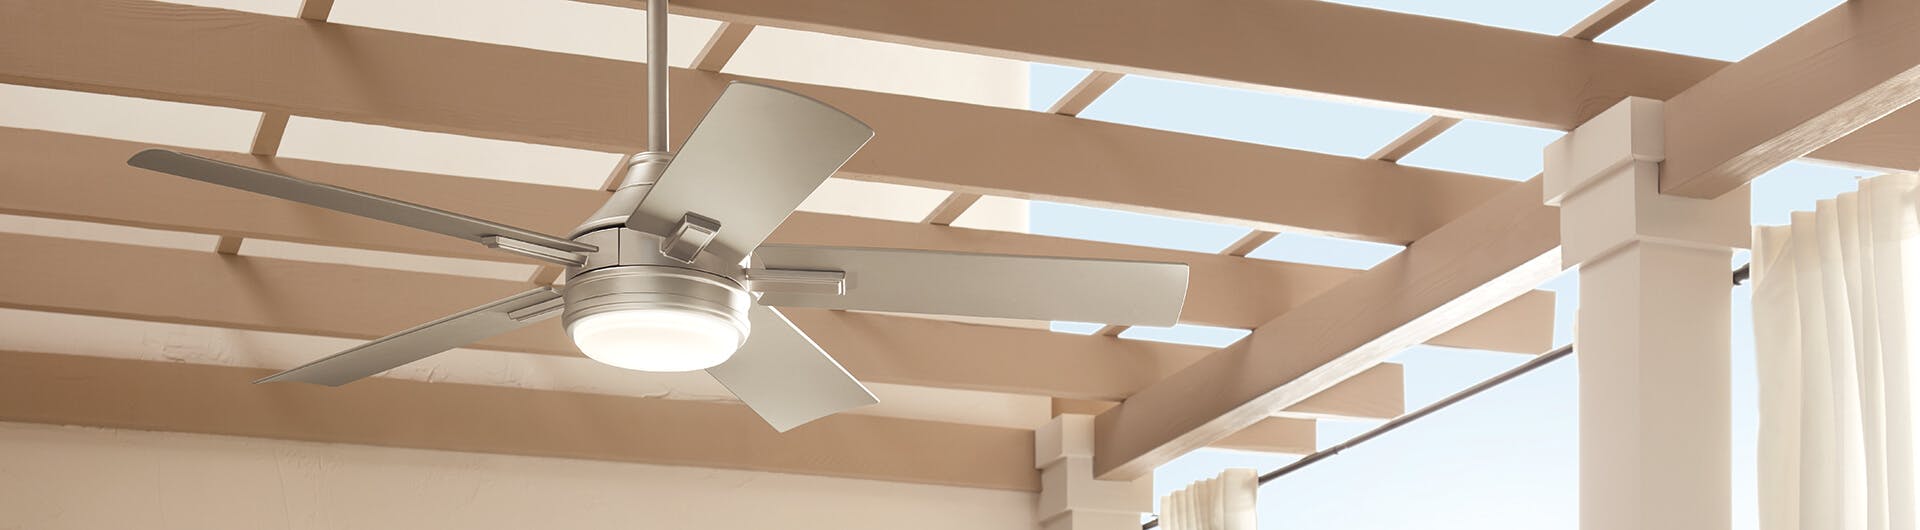 A Tide ceiling fan hiding from a wooden outdoor structure